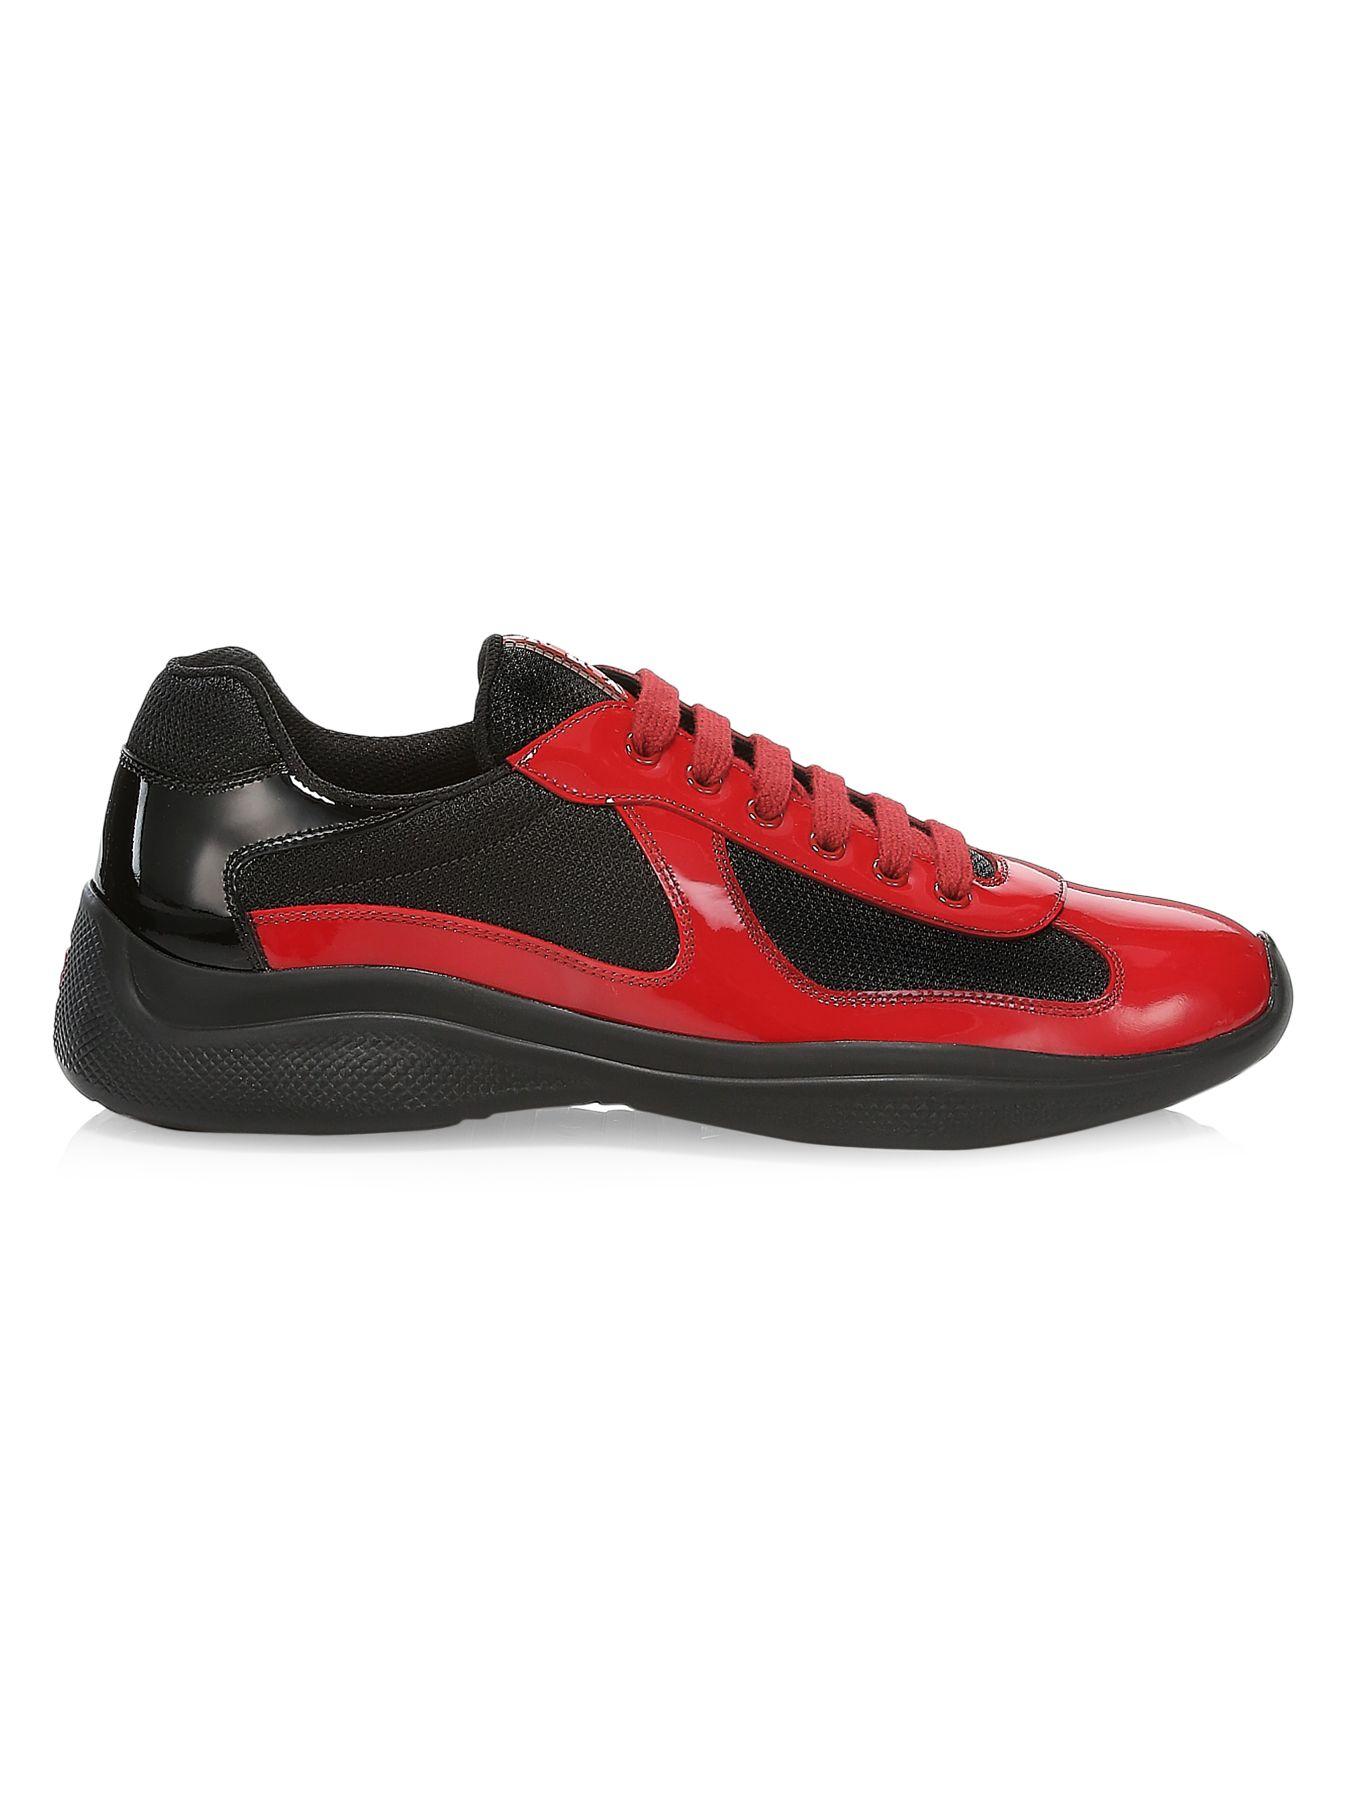 Prada America's Cup Patent Leather & Technical Fabric Sneakers in Red ...